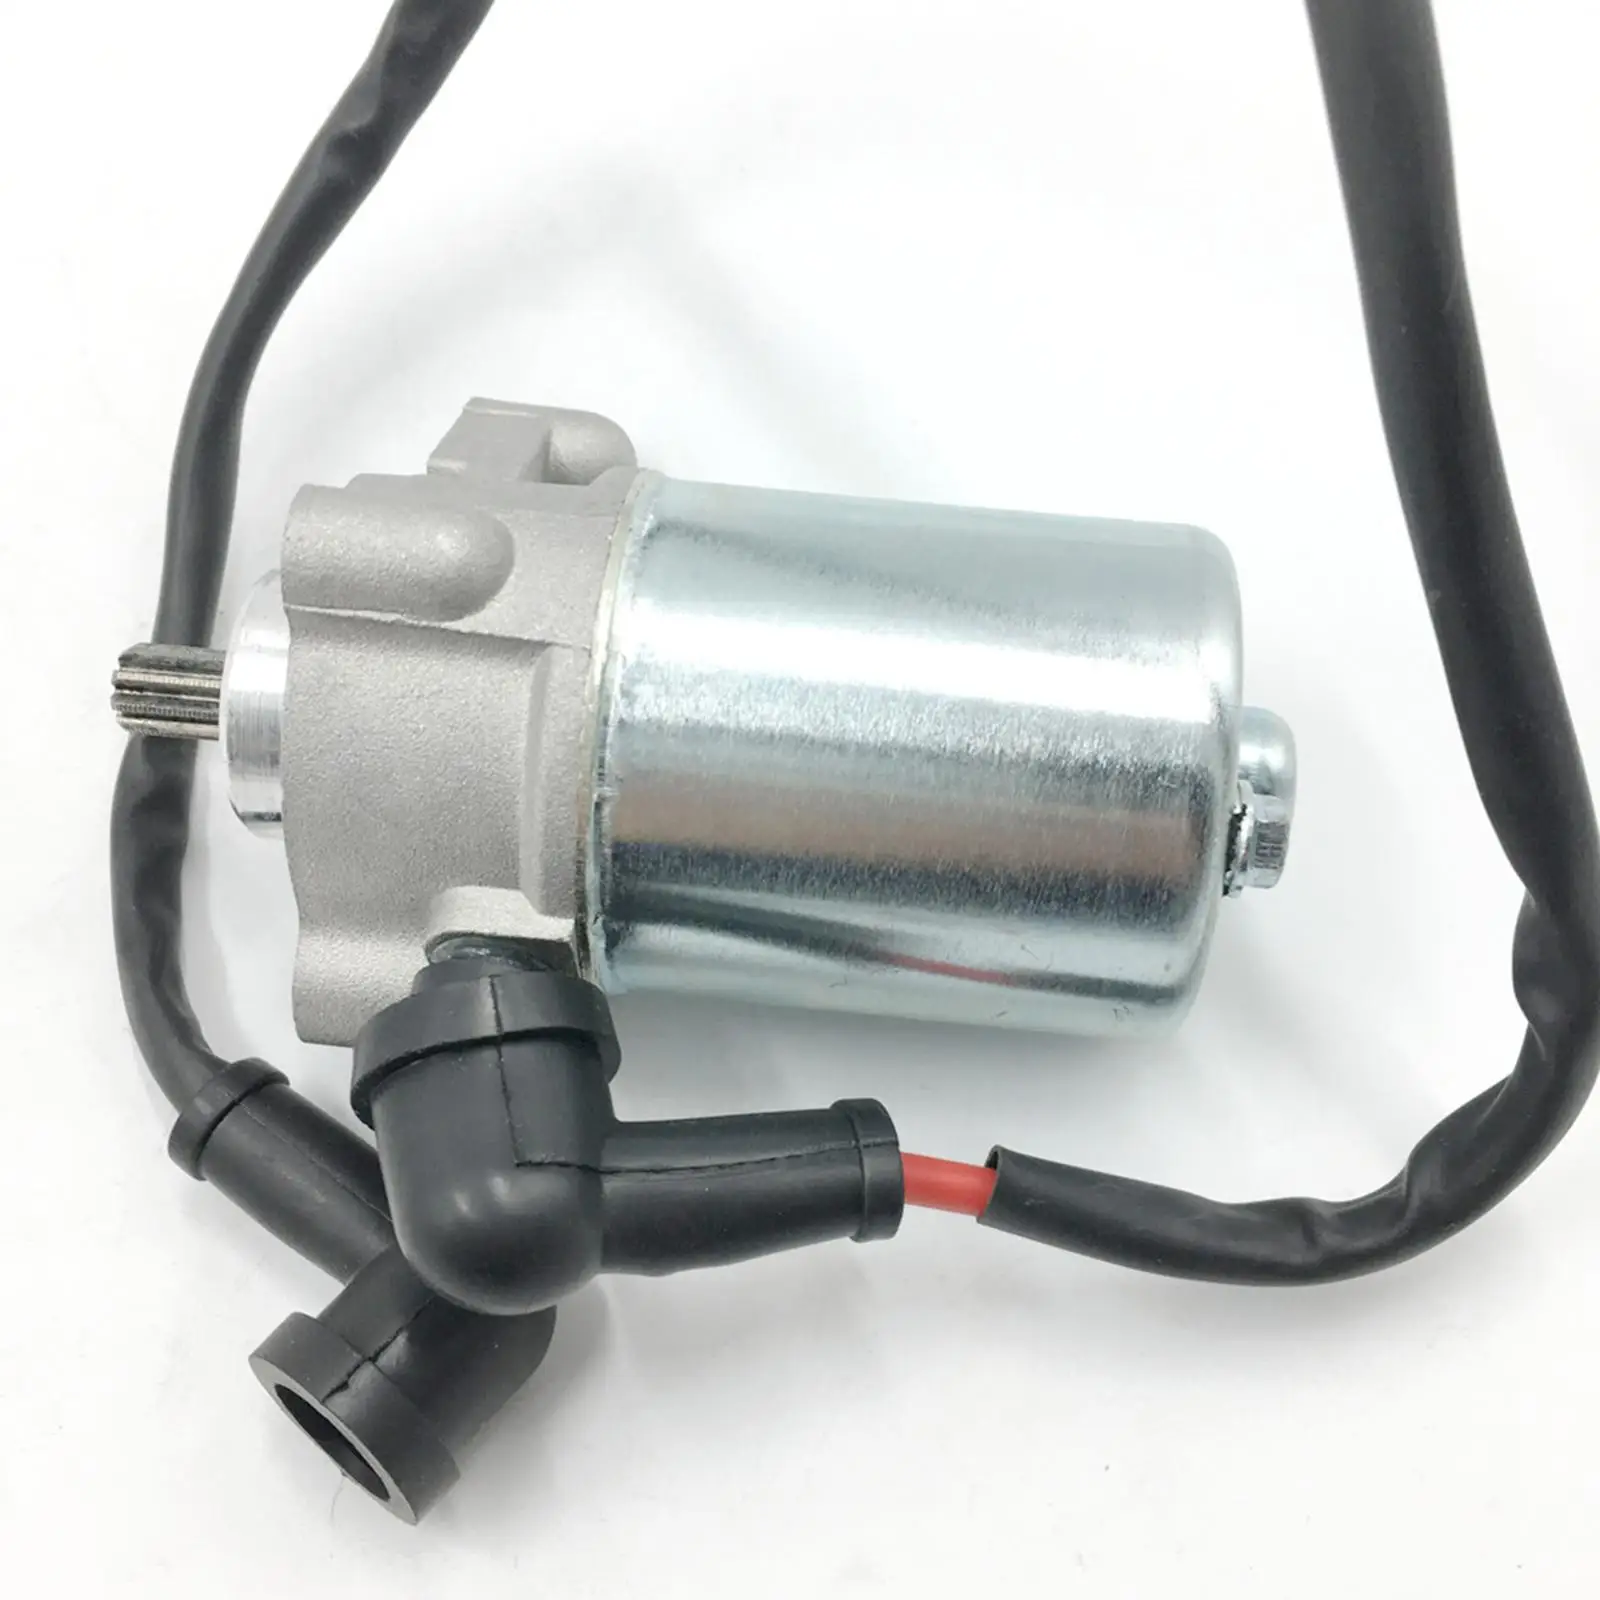 Motorcycle Starter Motor Replaces for Yamaha Tdr125 DT125x High